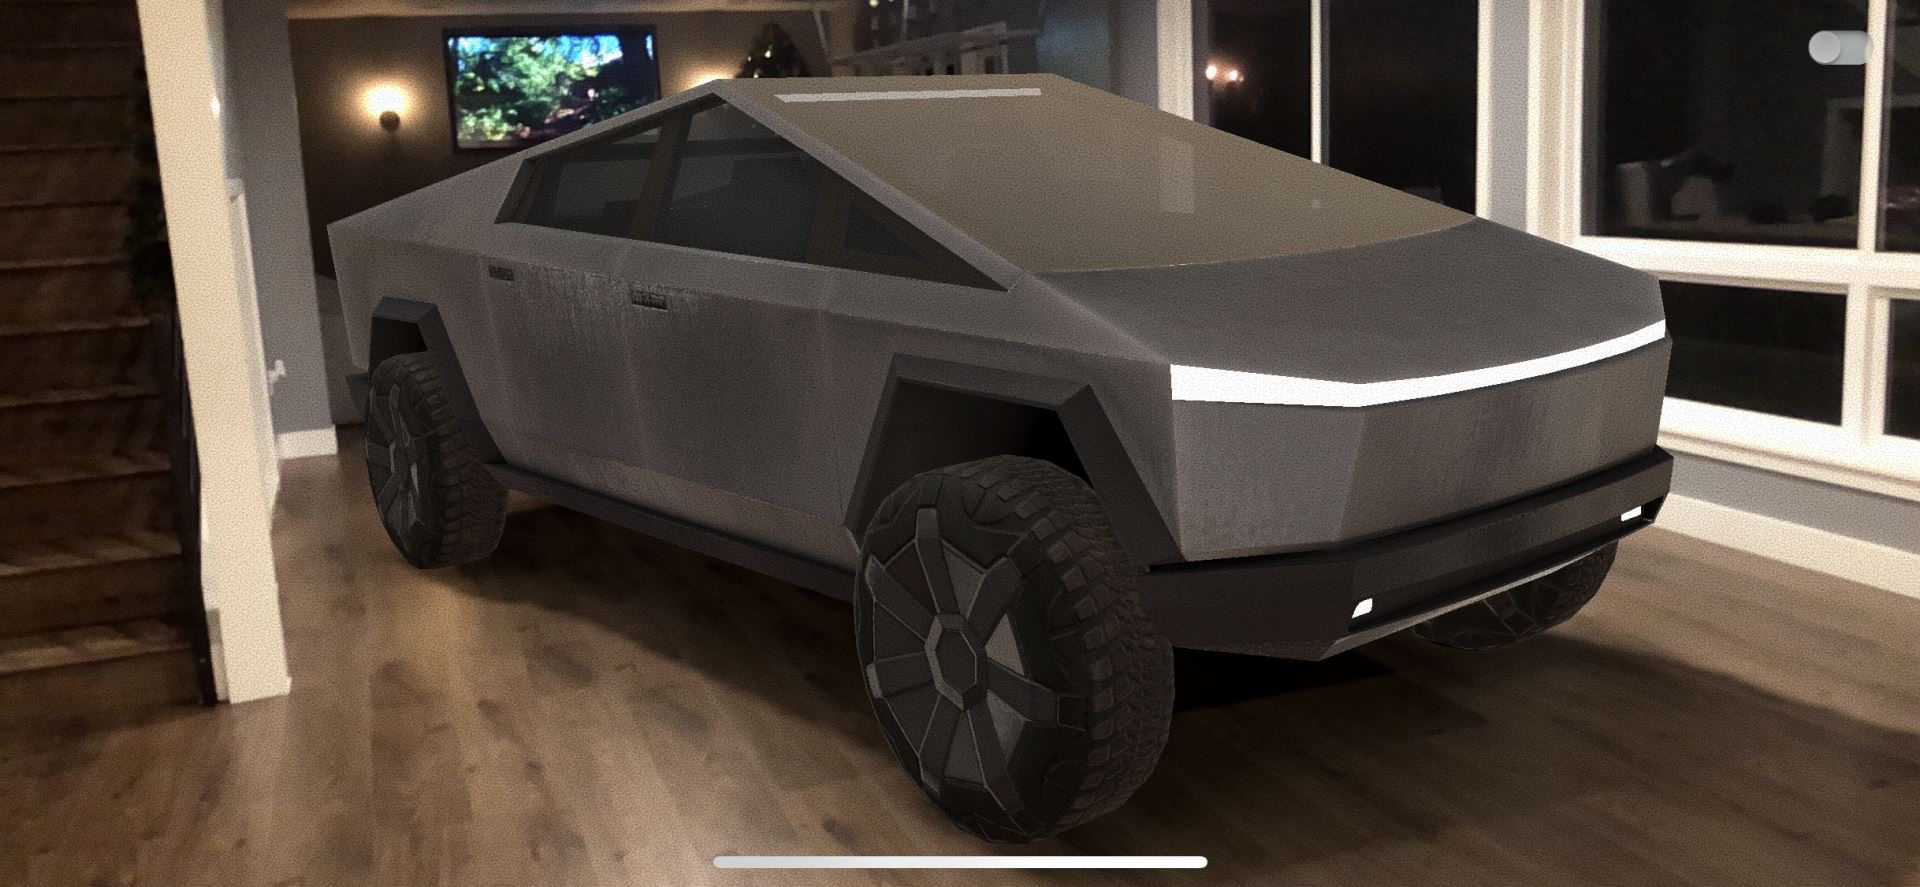 You can now take the Tesla Cybertruck home